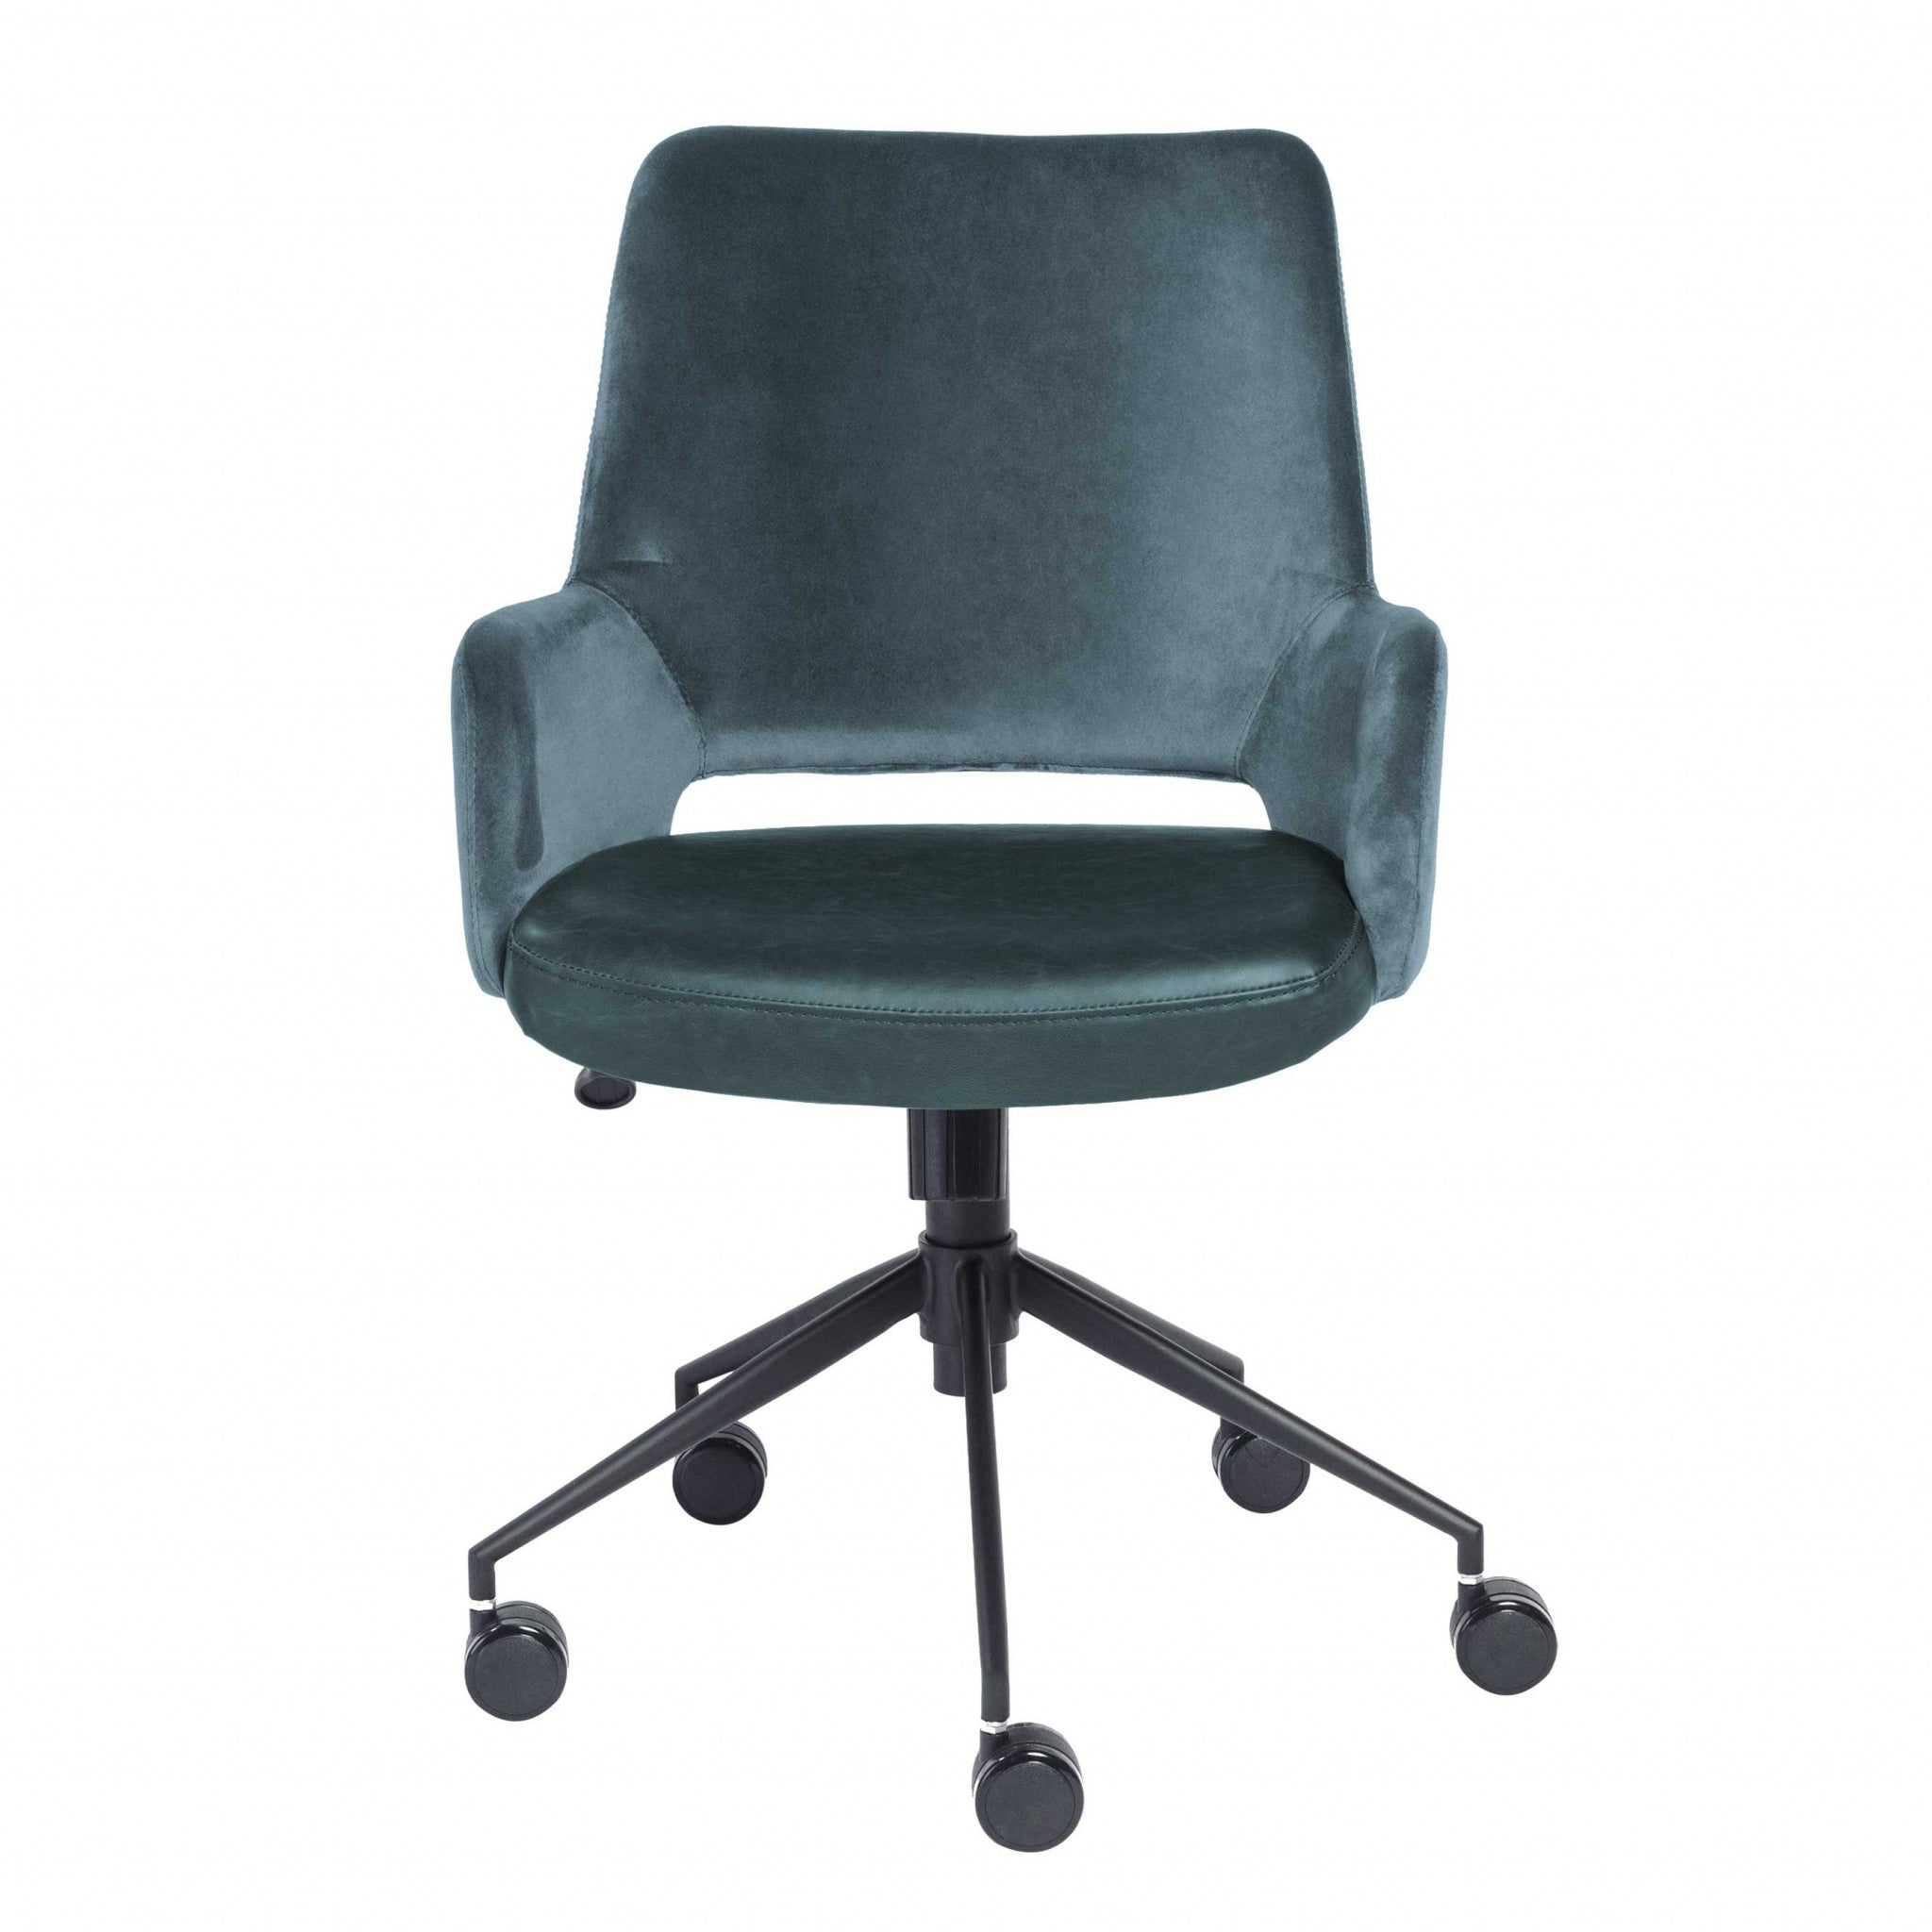 Blue and Black Adjustable Swivel Fabric Rolling Task Chair